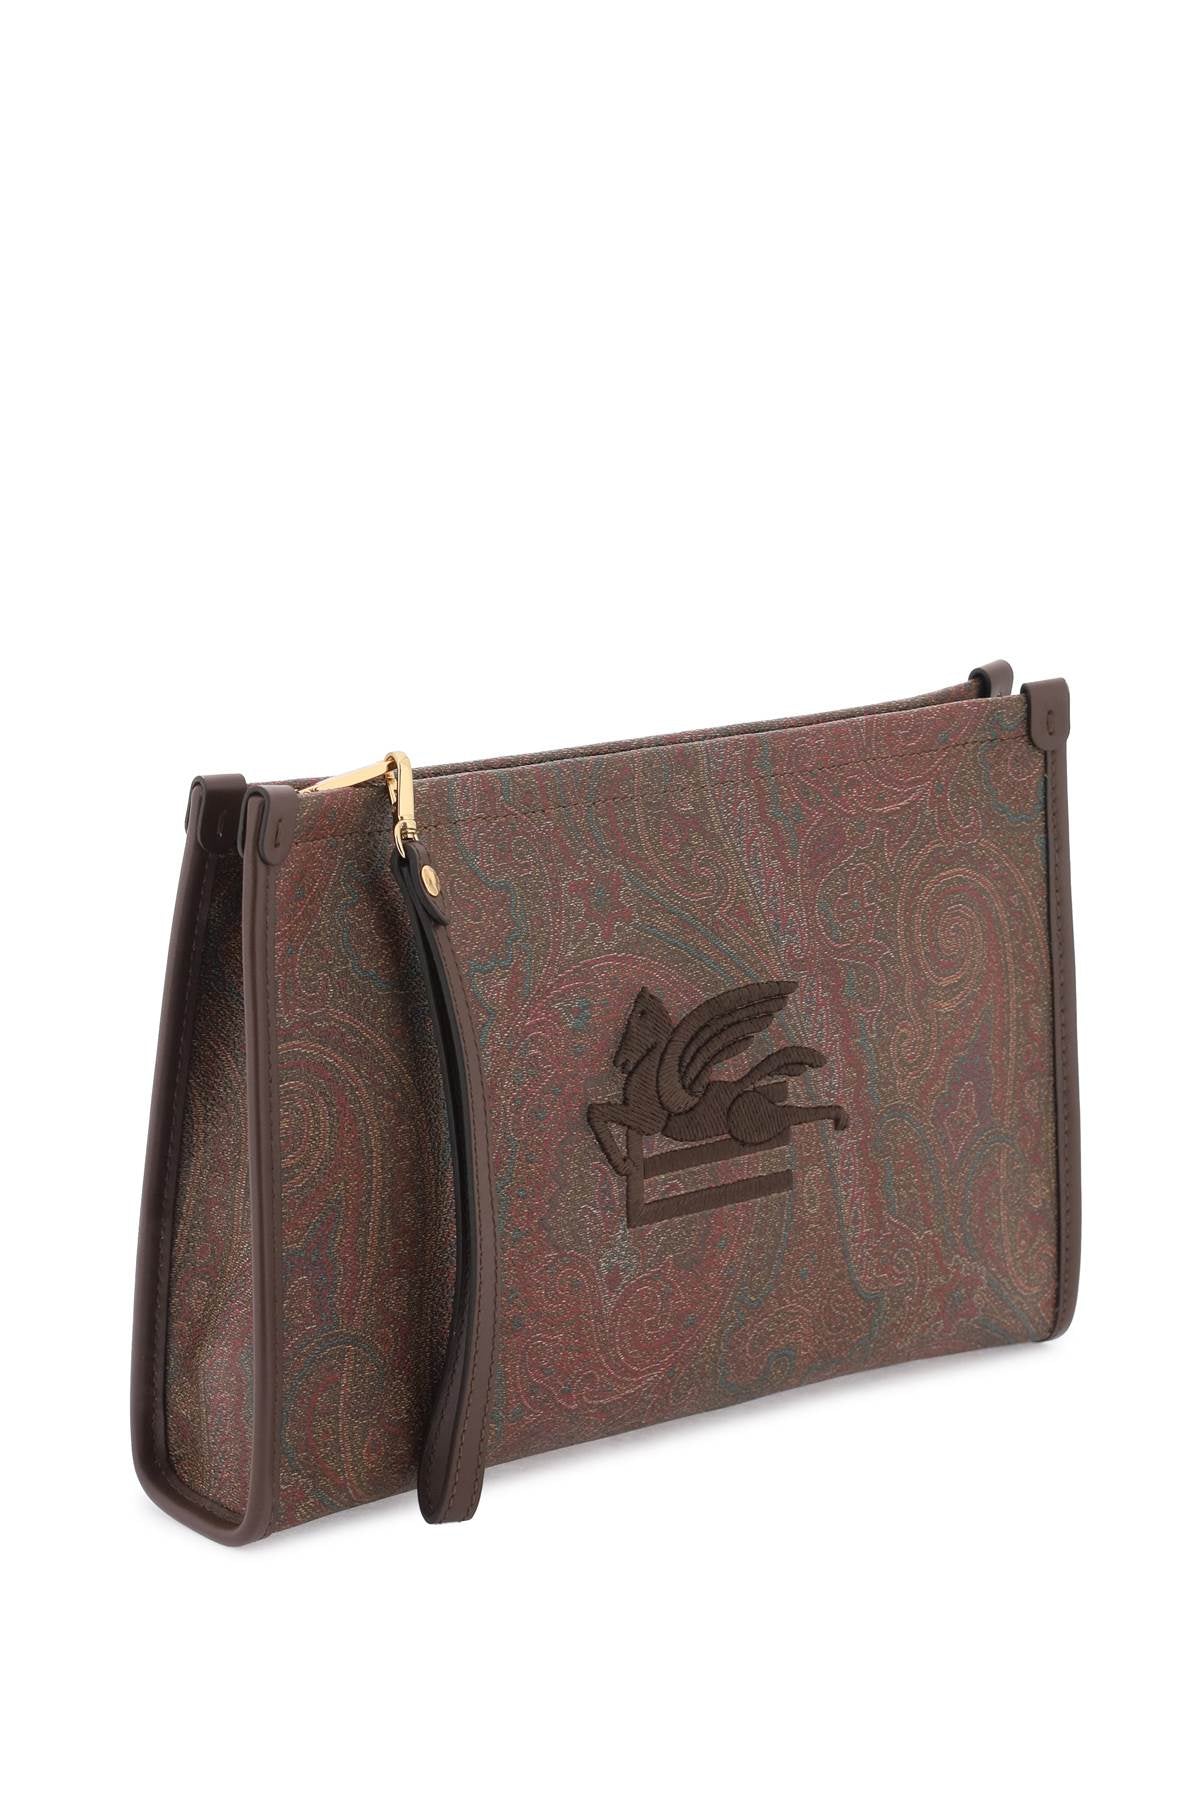 ETRO Paisley Embroidered Pouch Handbag for Men